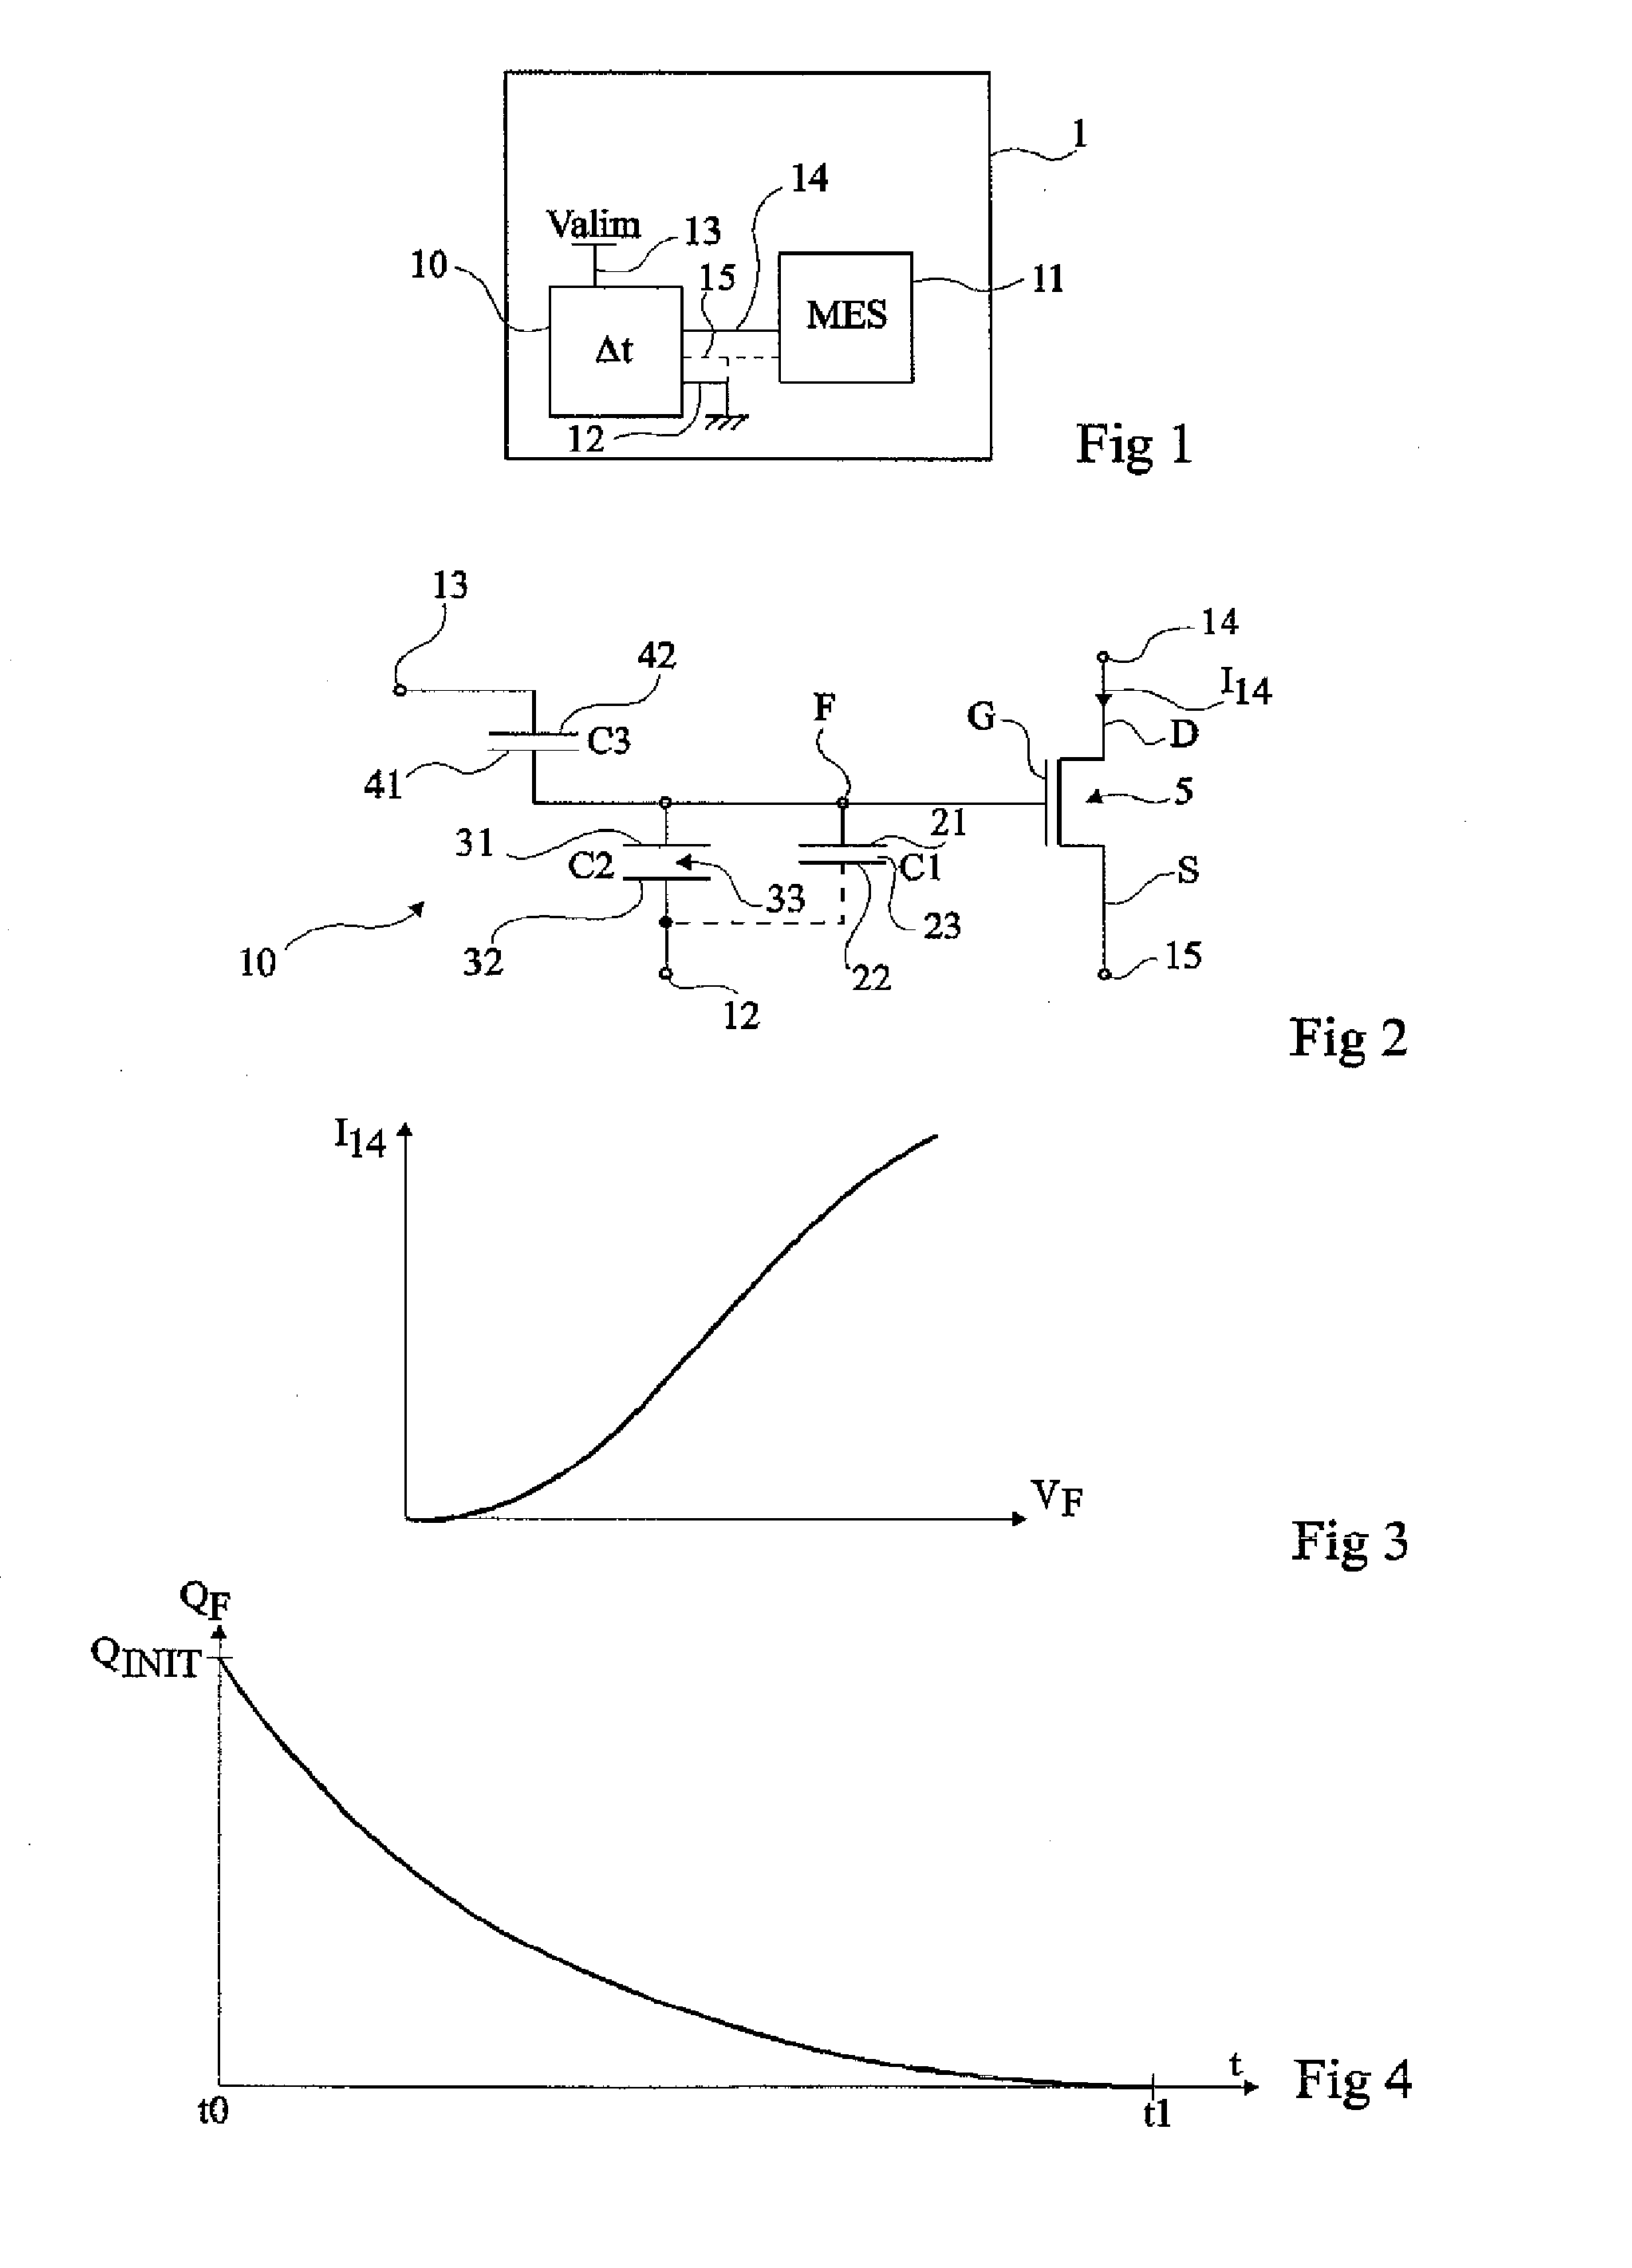 Circuit for reading a charge retention element for a time measurement